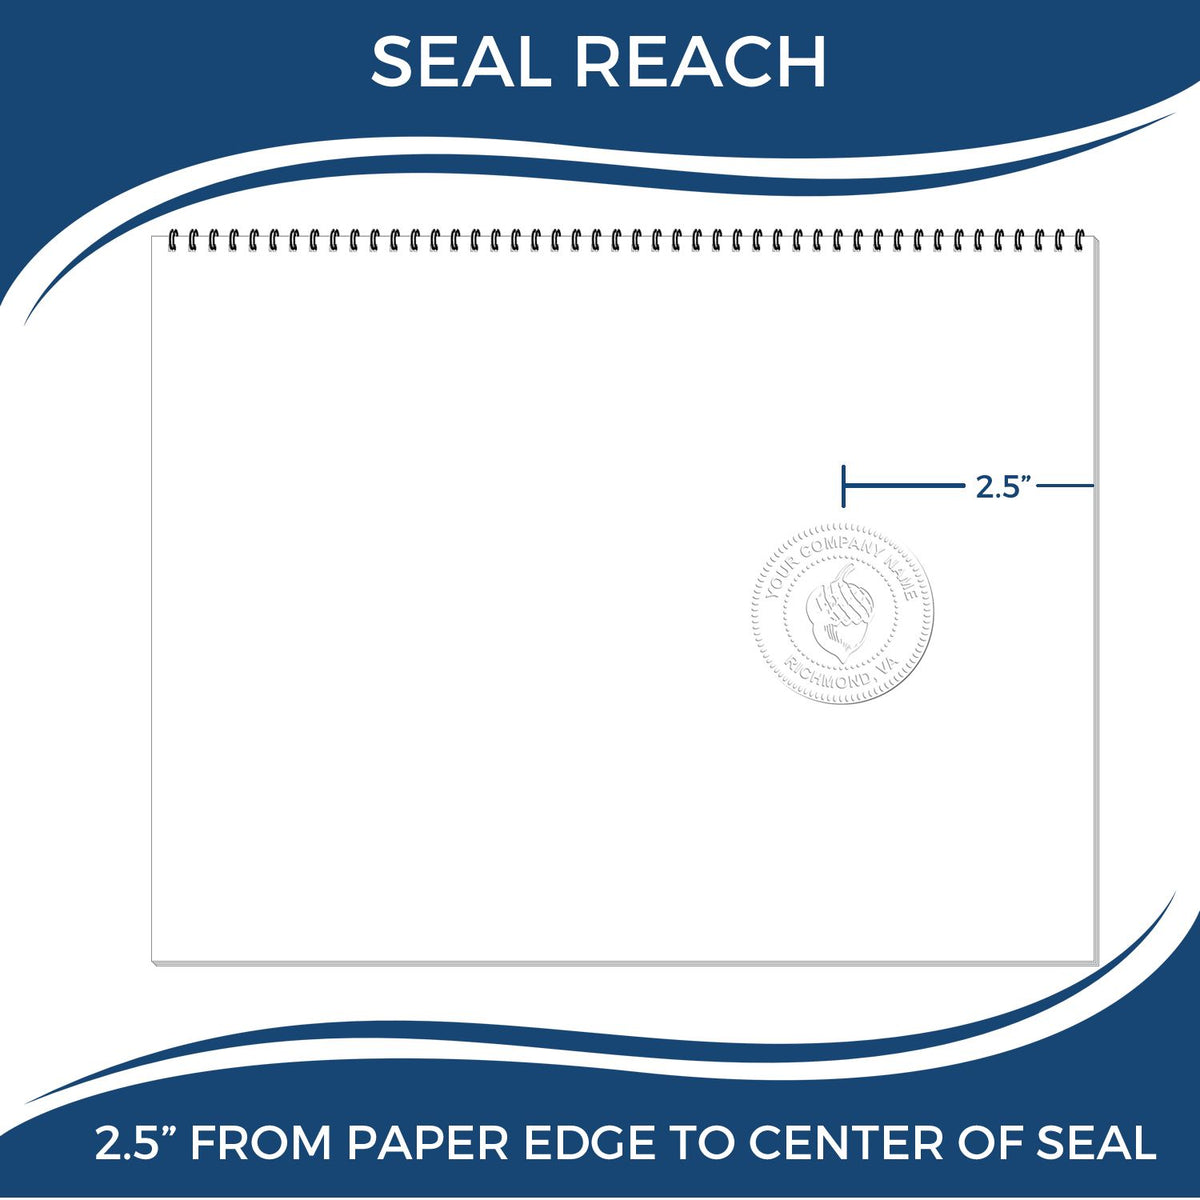 An infographic showing the seal reach which is represented by a ruler and a miniature seal image of the Heavy Duty Cast Iron Mississippi Geologist Seal Embosser